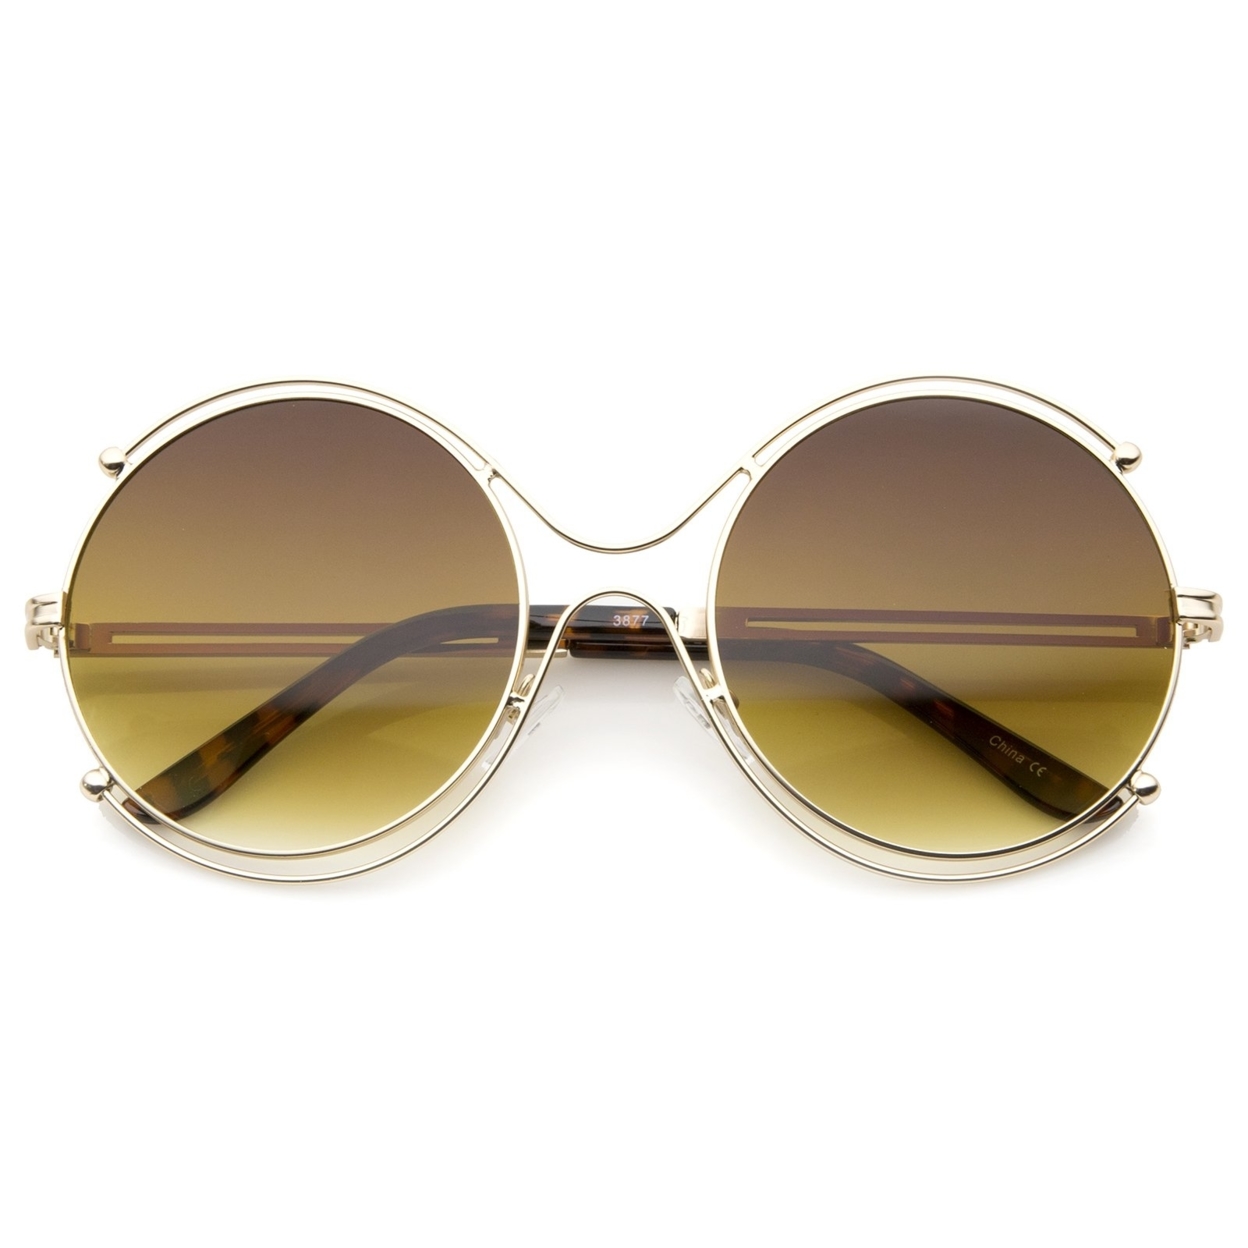 Women's Fashion Wire Rimmed Temple Cutout Round Oversized Sunglasses 58mm - Gold / Amber